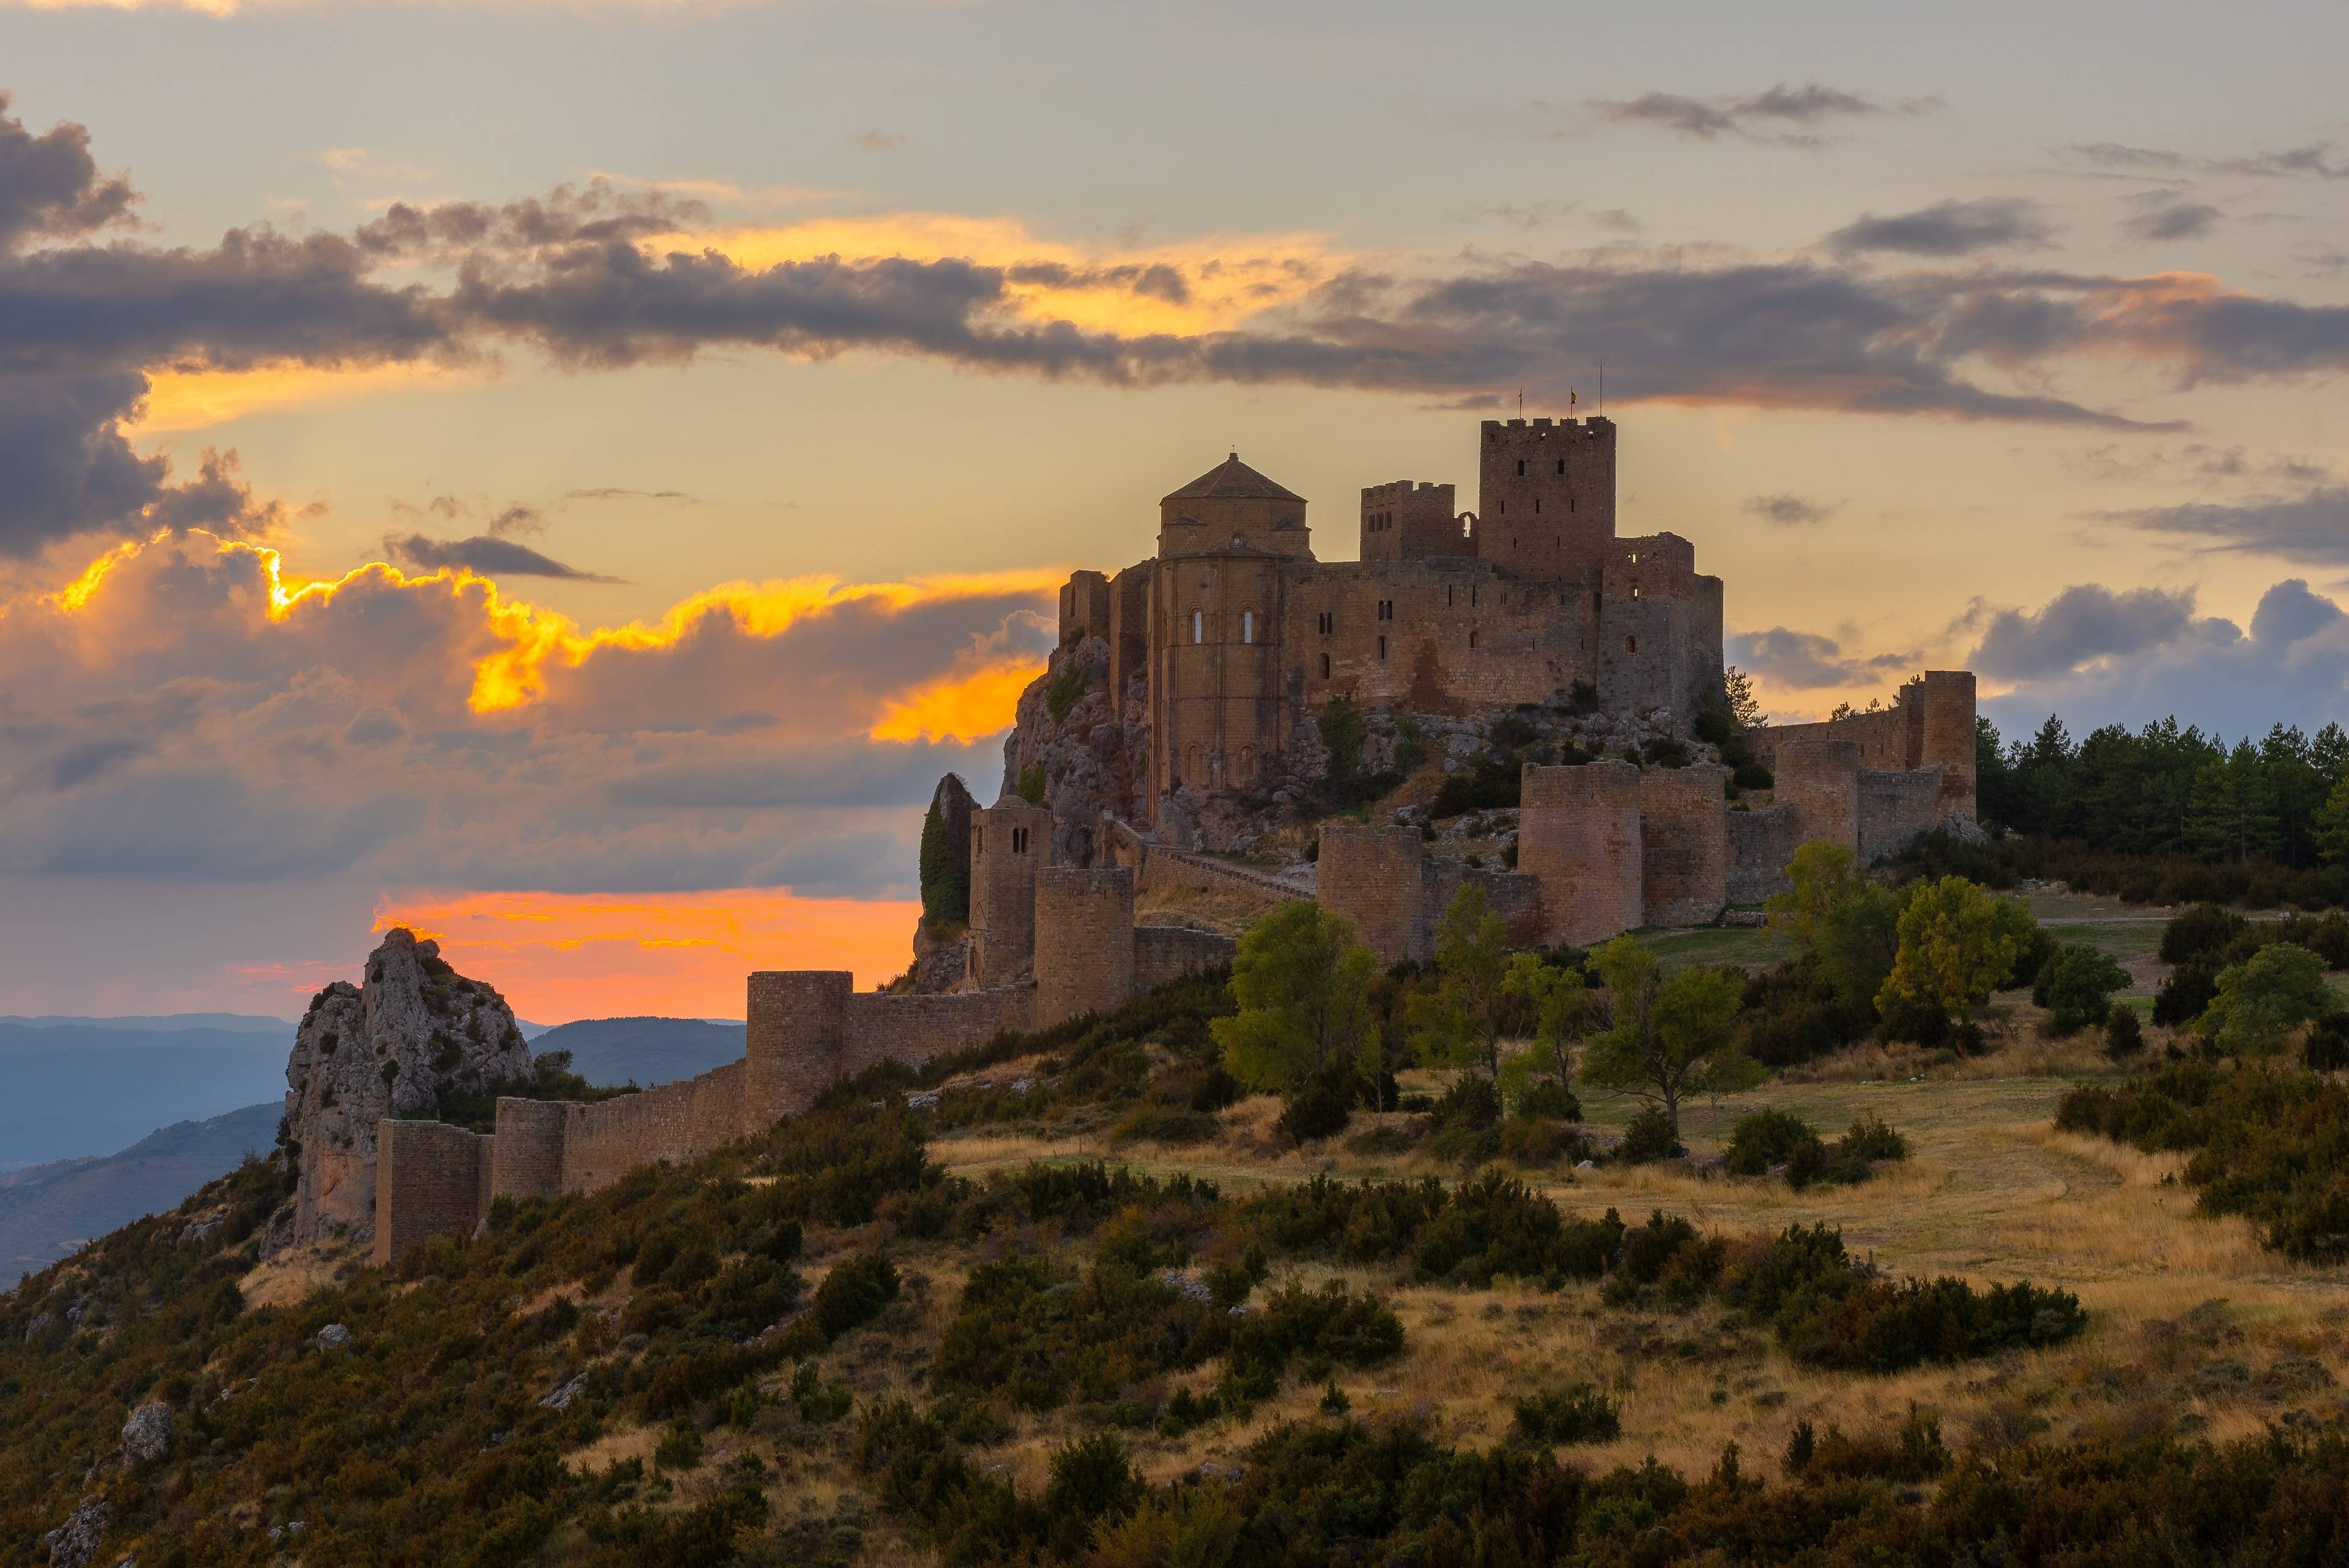 Historical Spots in Huesca: Loarre Castle and Jaca